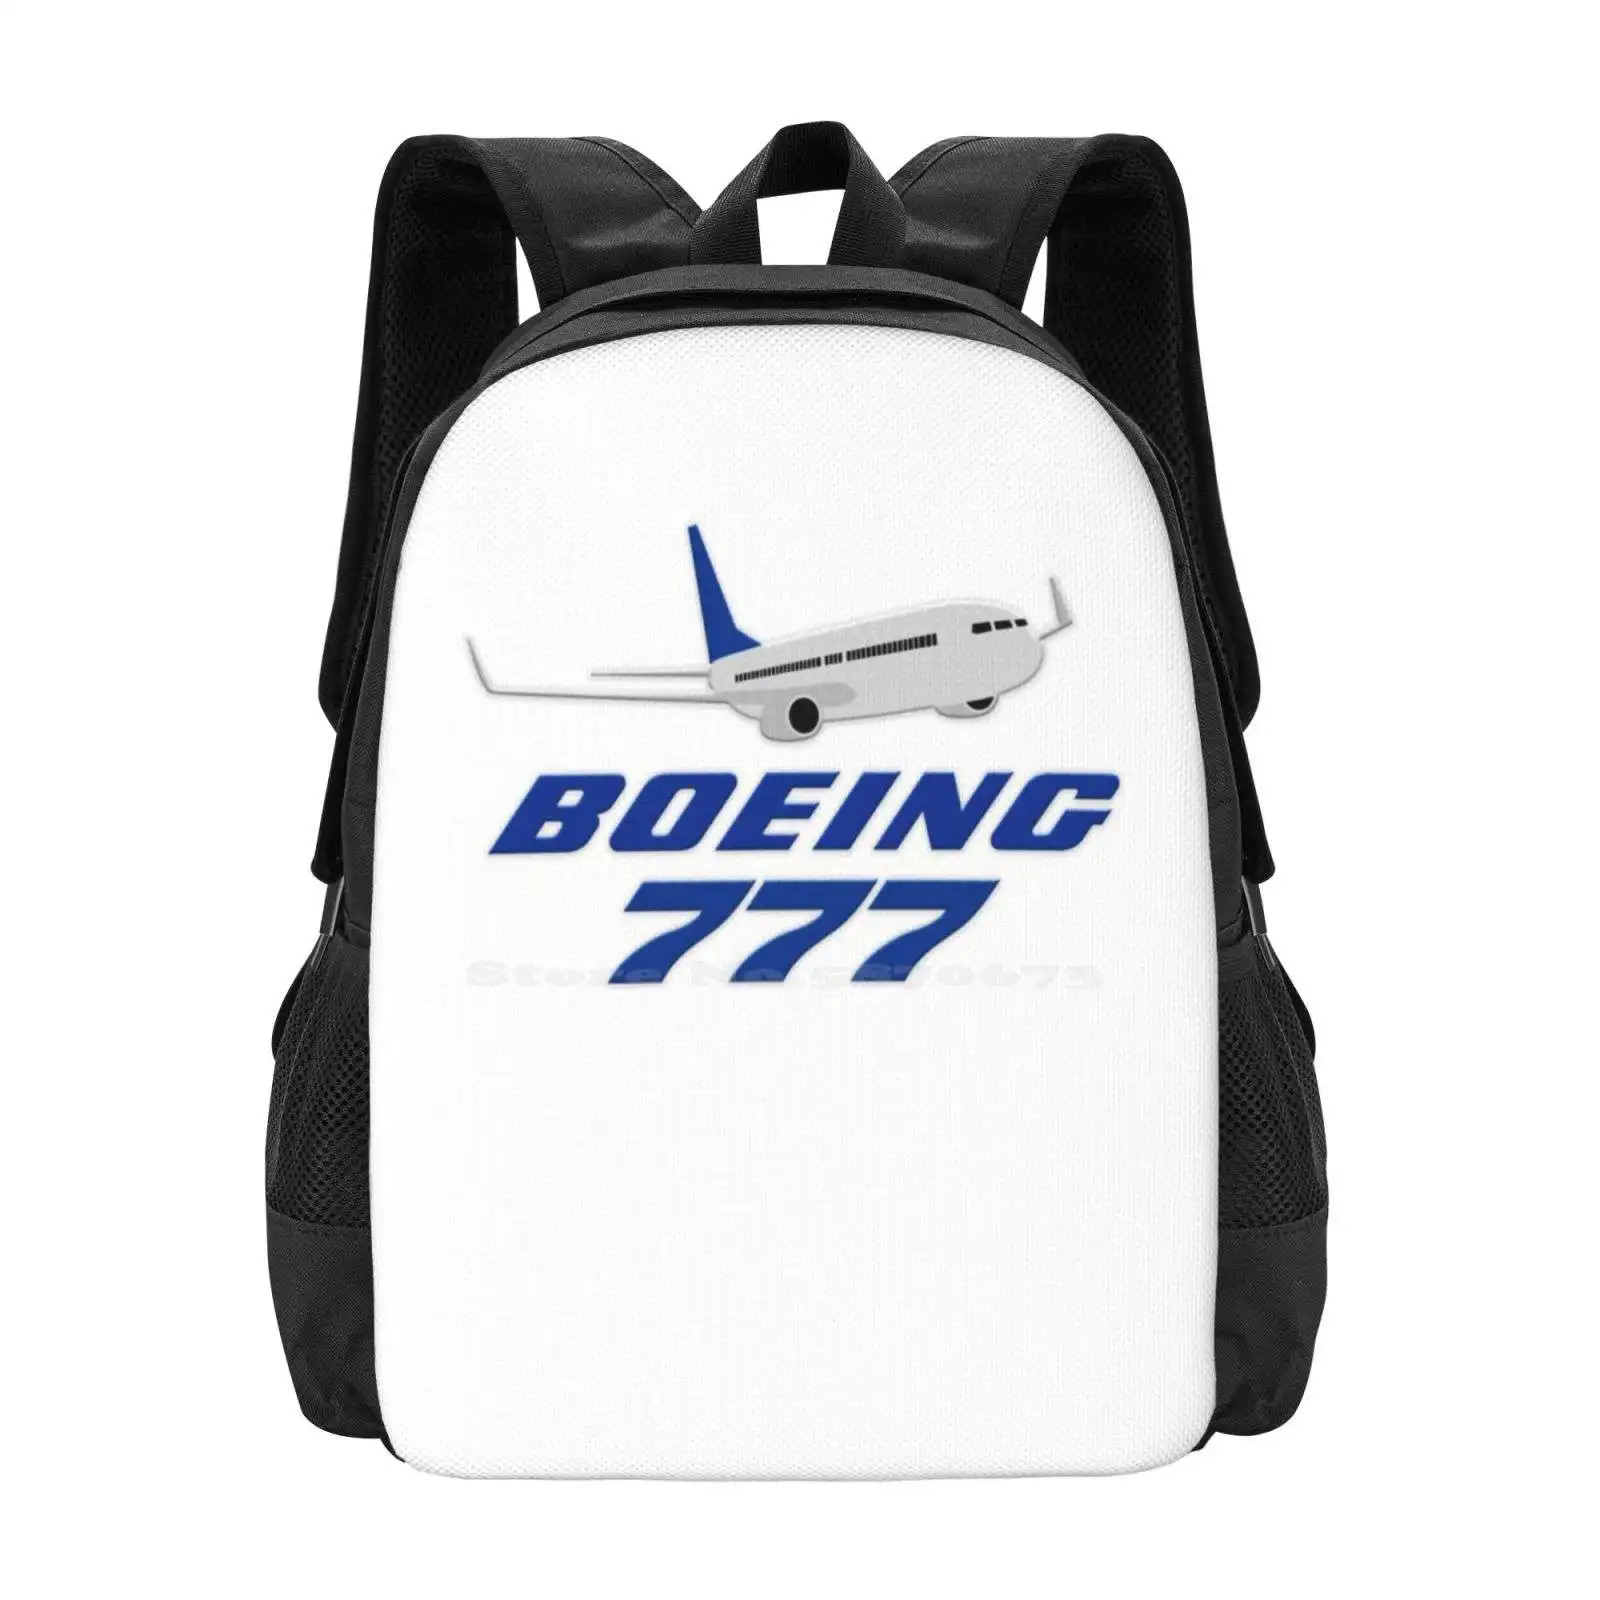 

Boeing 777 School Bag Big Capacity Backpack Laptop Boeing Airbus Cessna Aircraft Aeroplane Airplane Flying Aviation Pilot